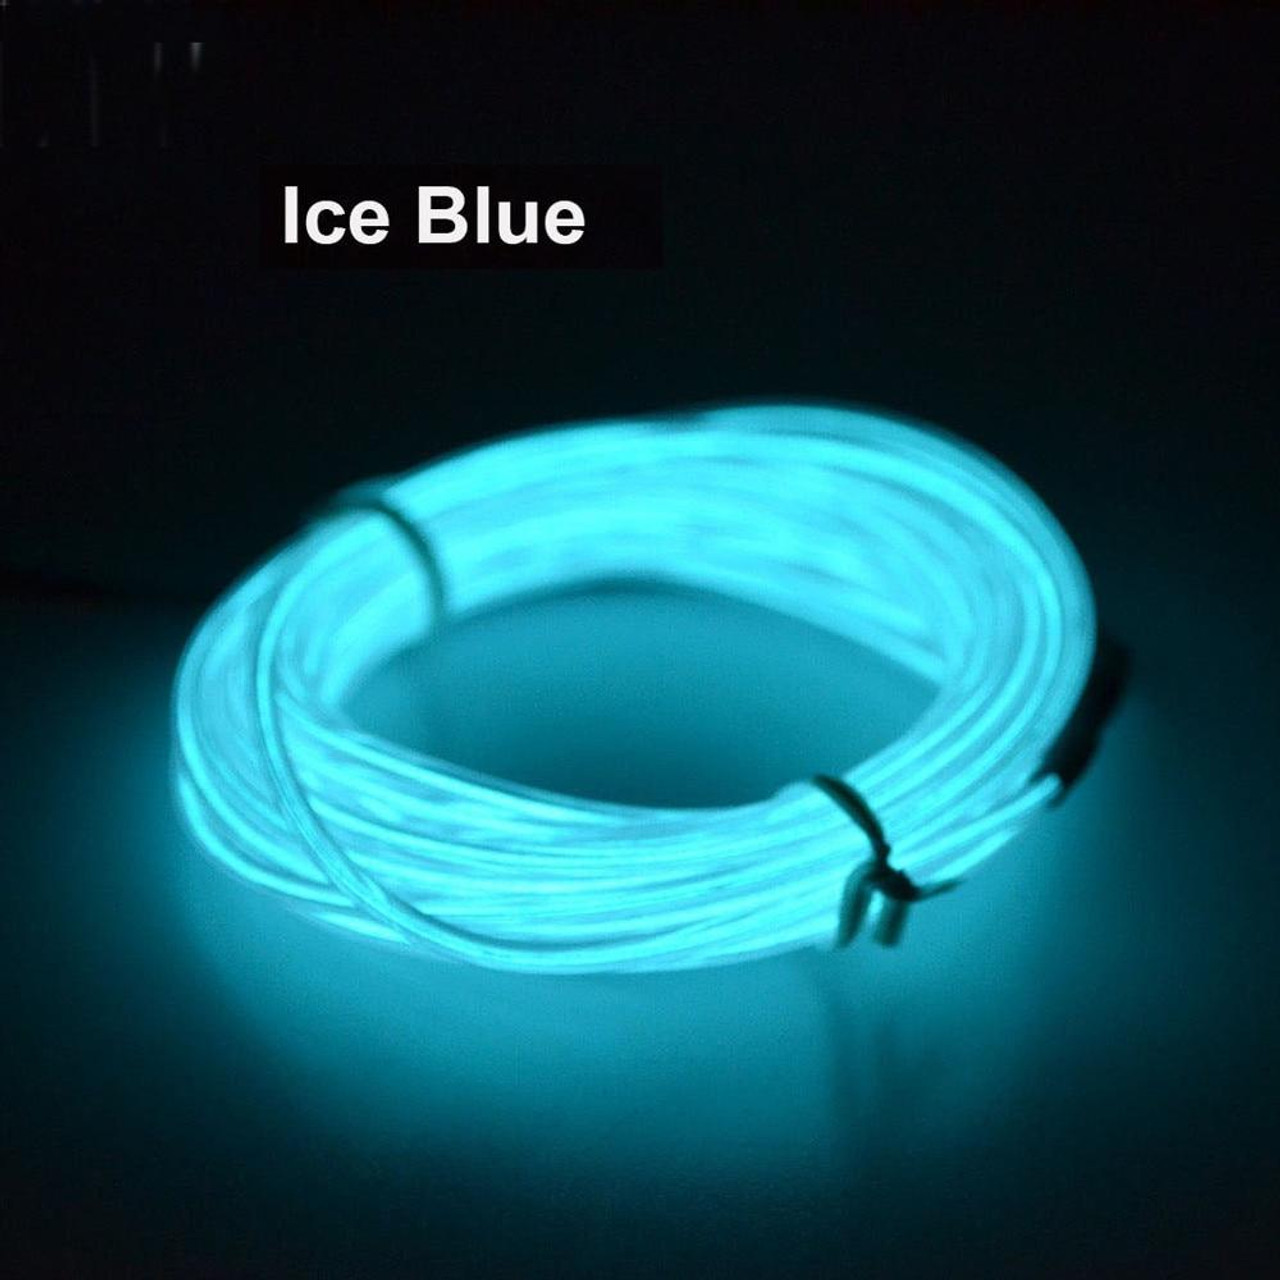 Neon LED Light Glow EL Wire String Strip Rope Tube Decor Car Party